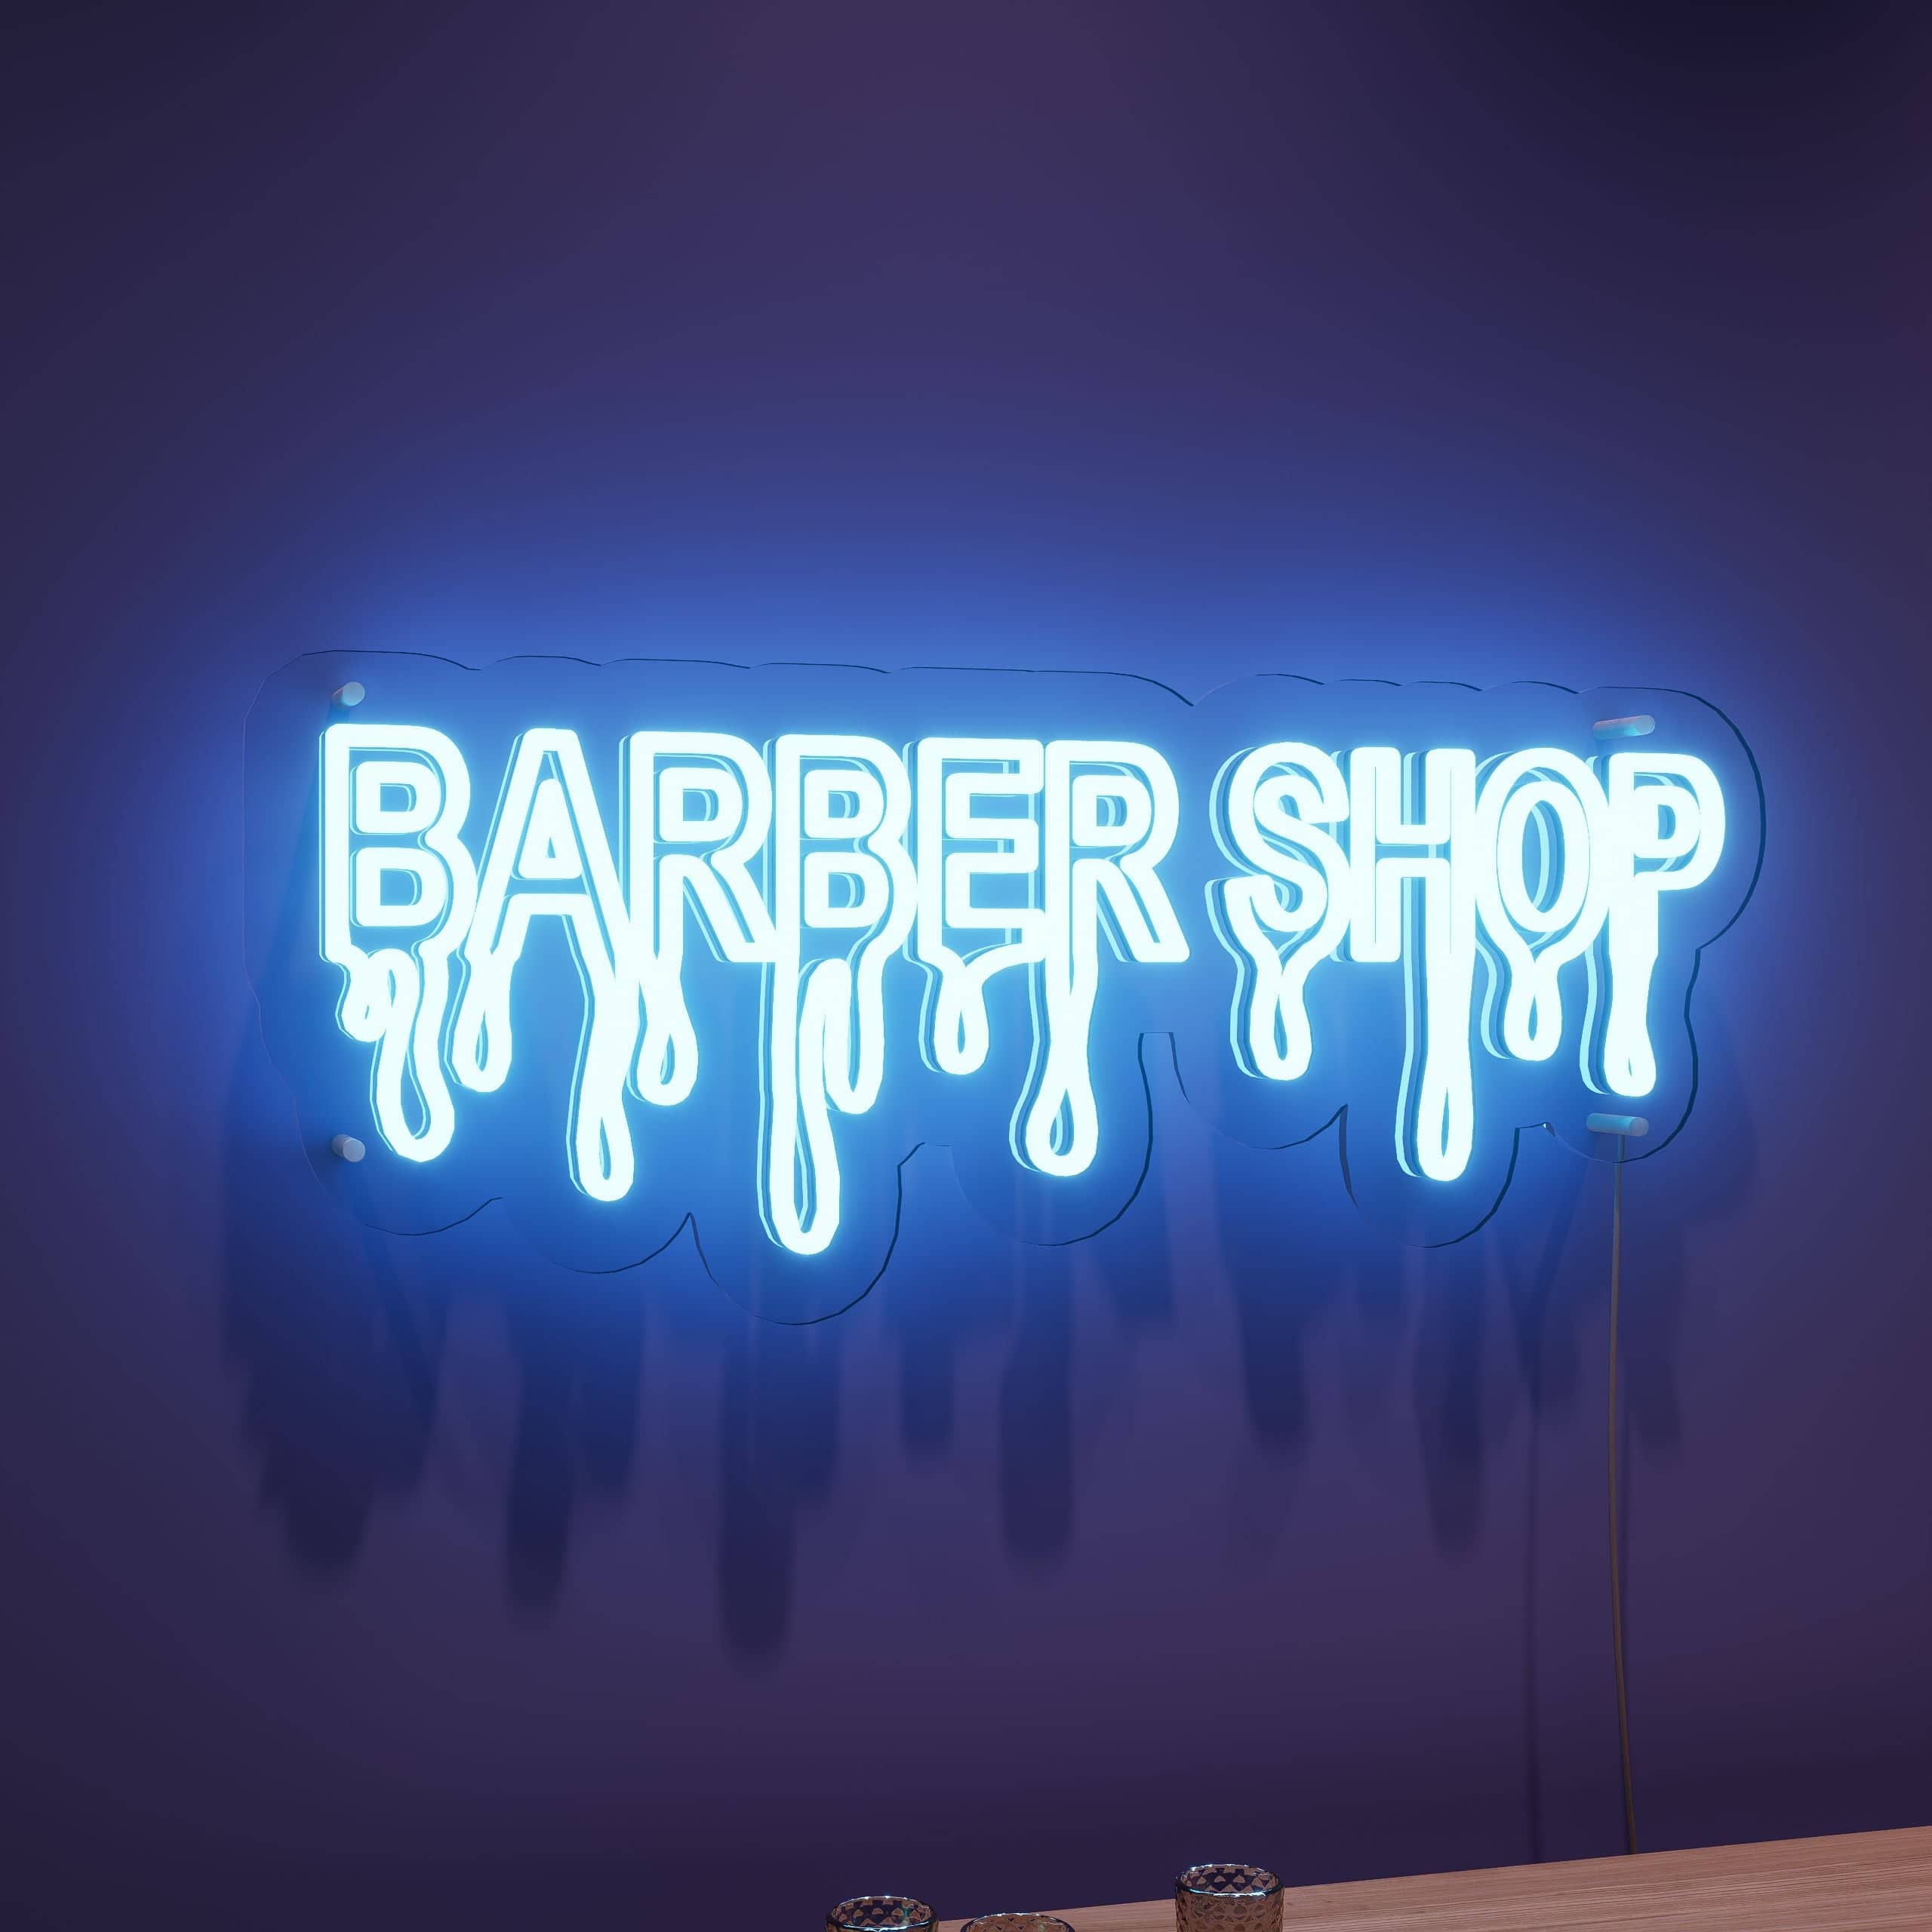 traditional-barber-services-neon-sign-lite